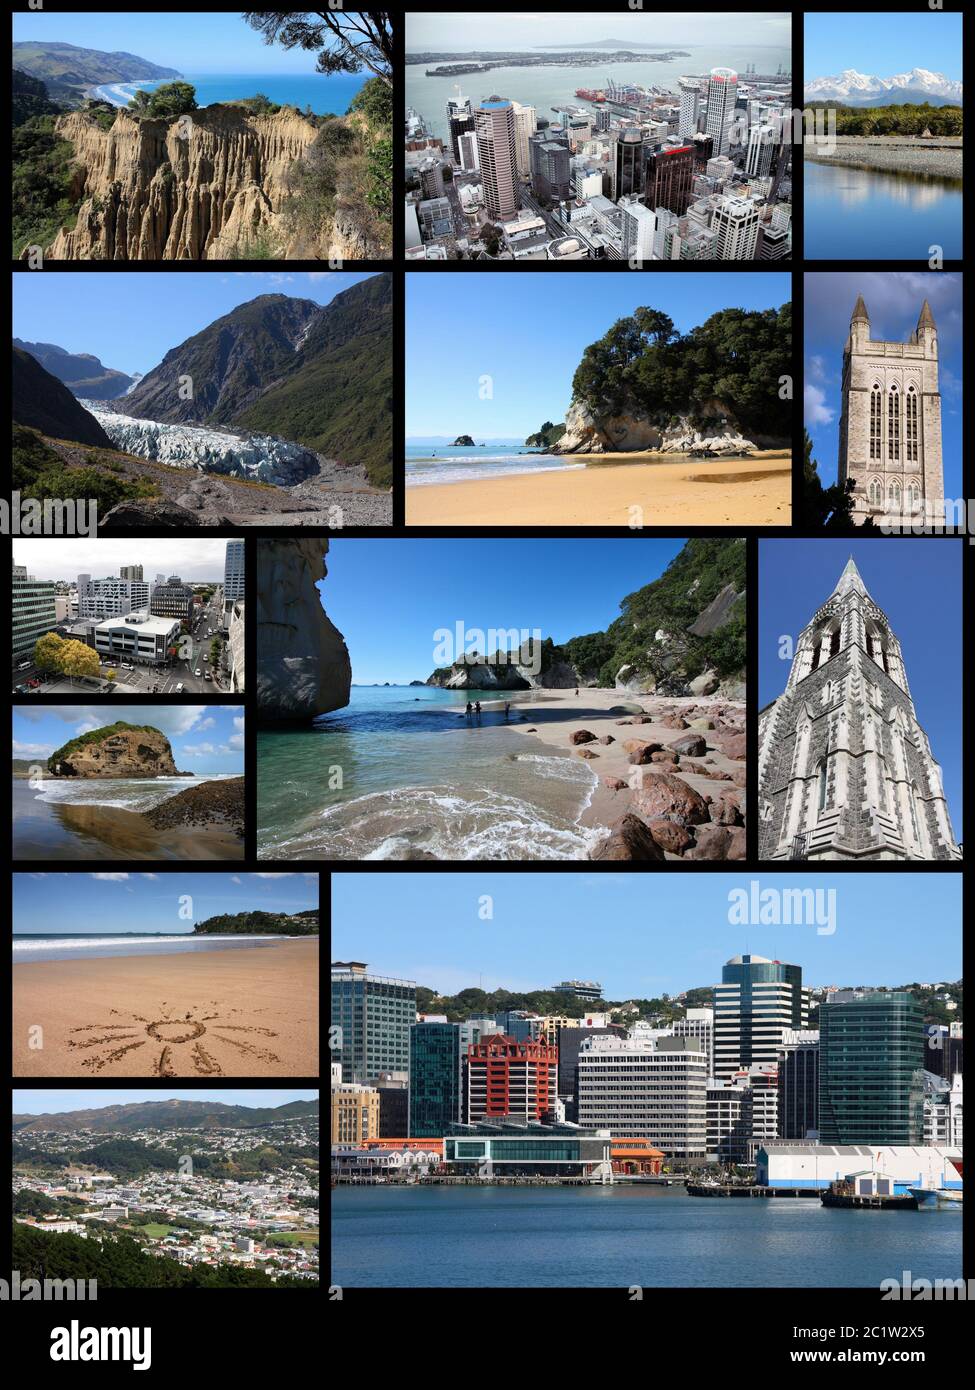 New Zealand landmarks - travel photo collage with Auckland, Wellington, Christchurch, beaches and mountains. Stock Photo